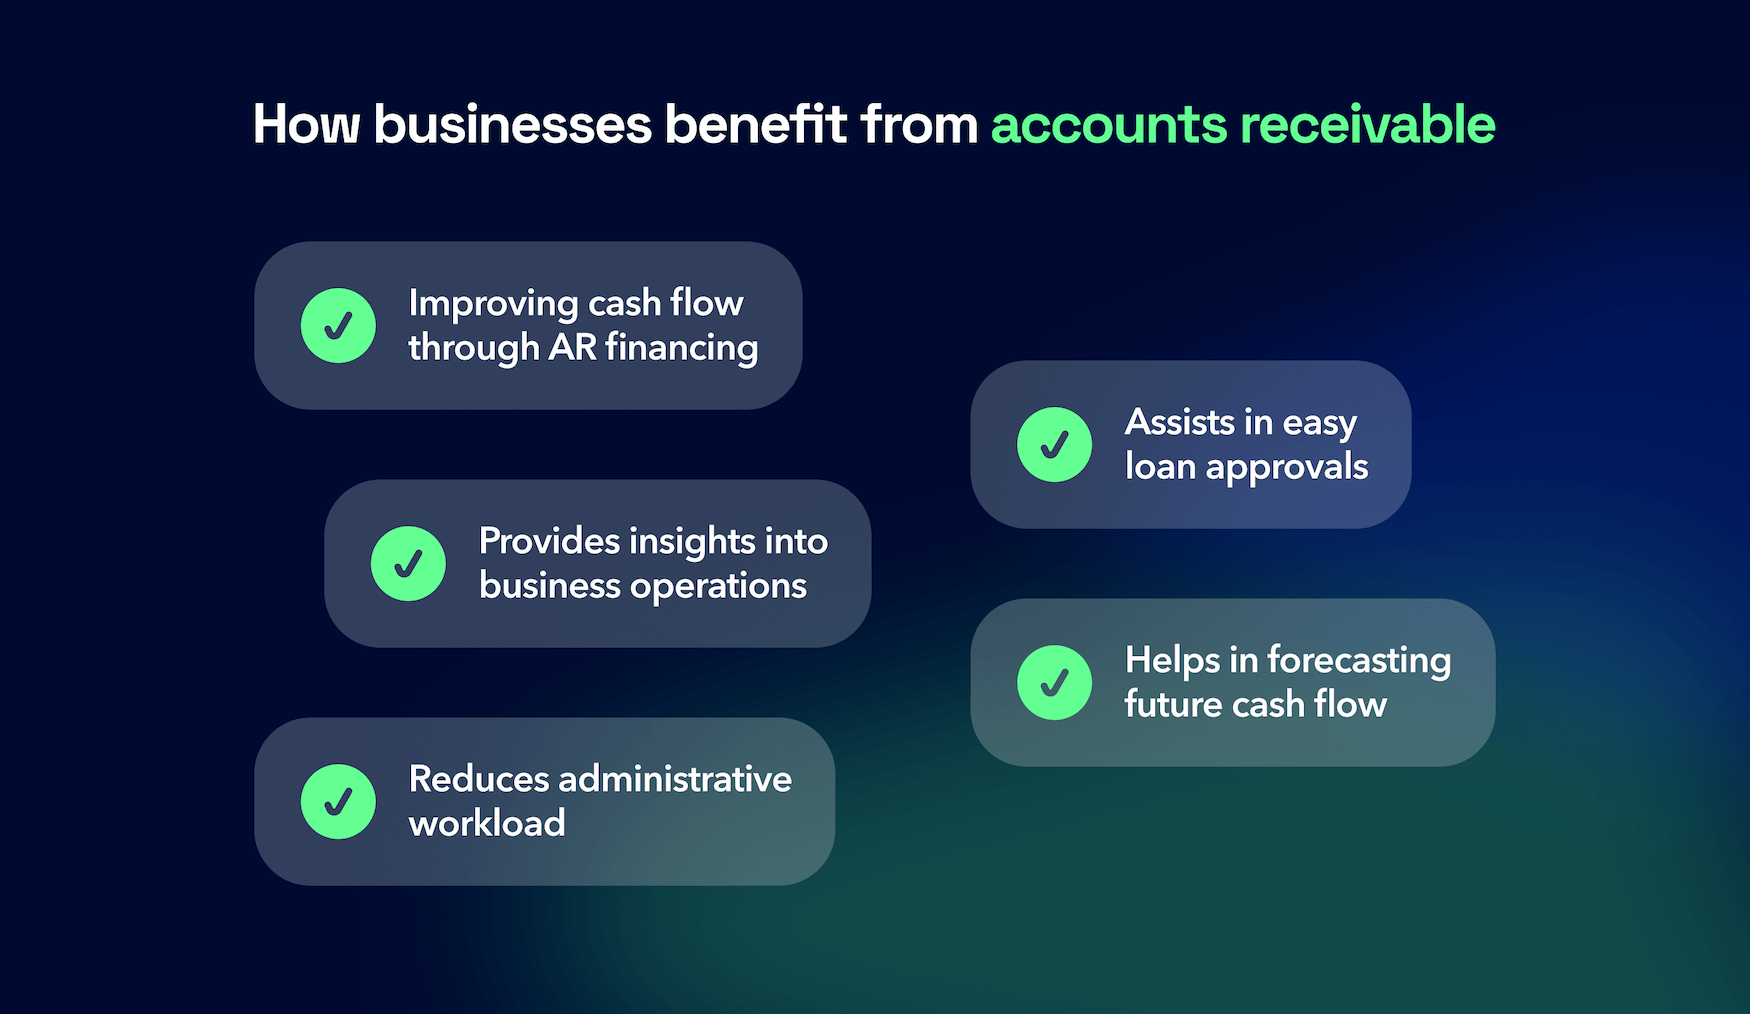 How businesses benefit from AR: improving cash flow, providing business insights, reduces admin workload, assists in loan approvals, helps forecasting